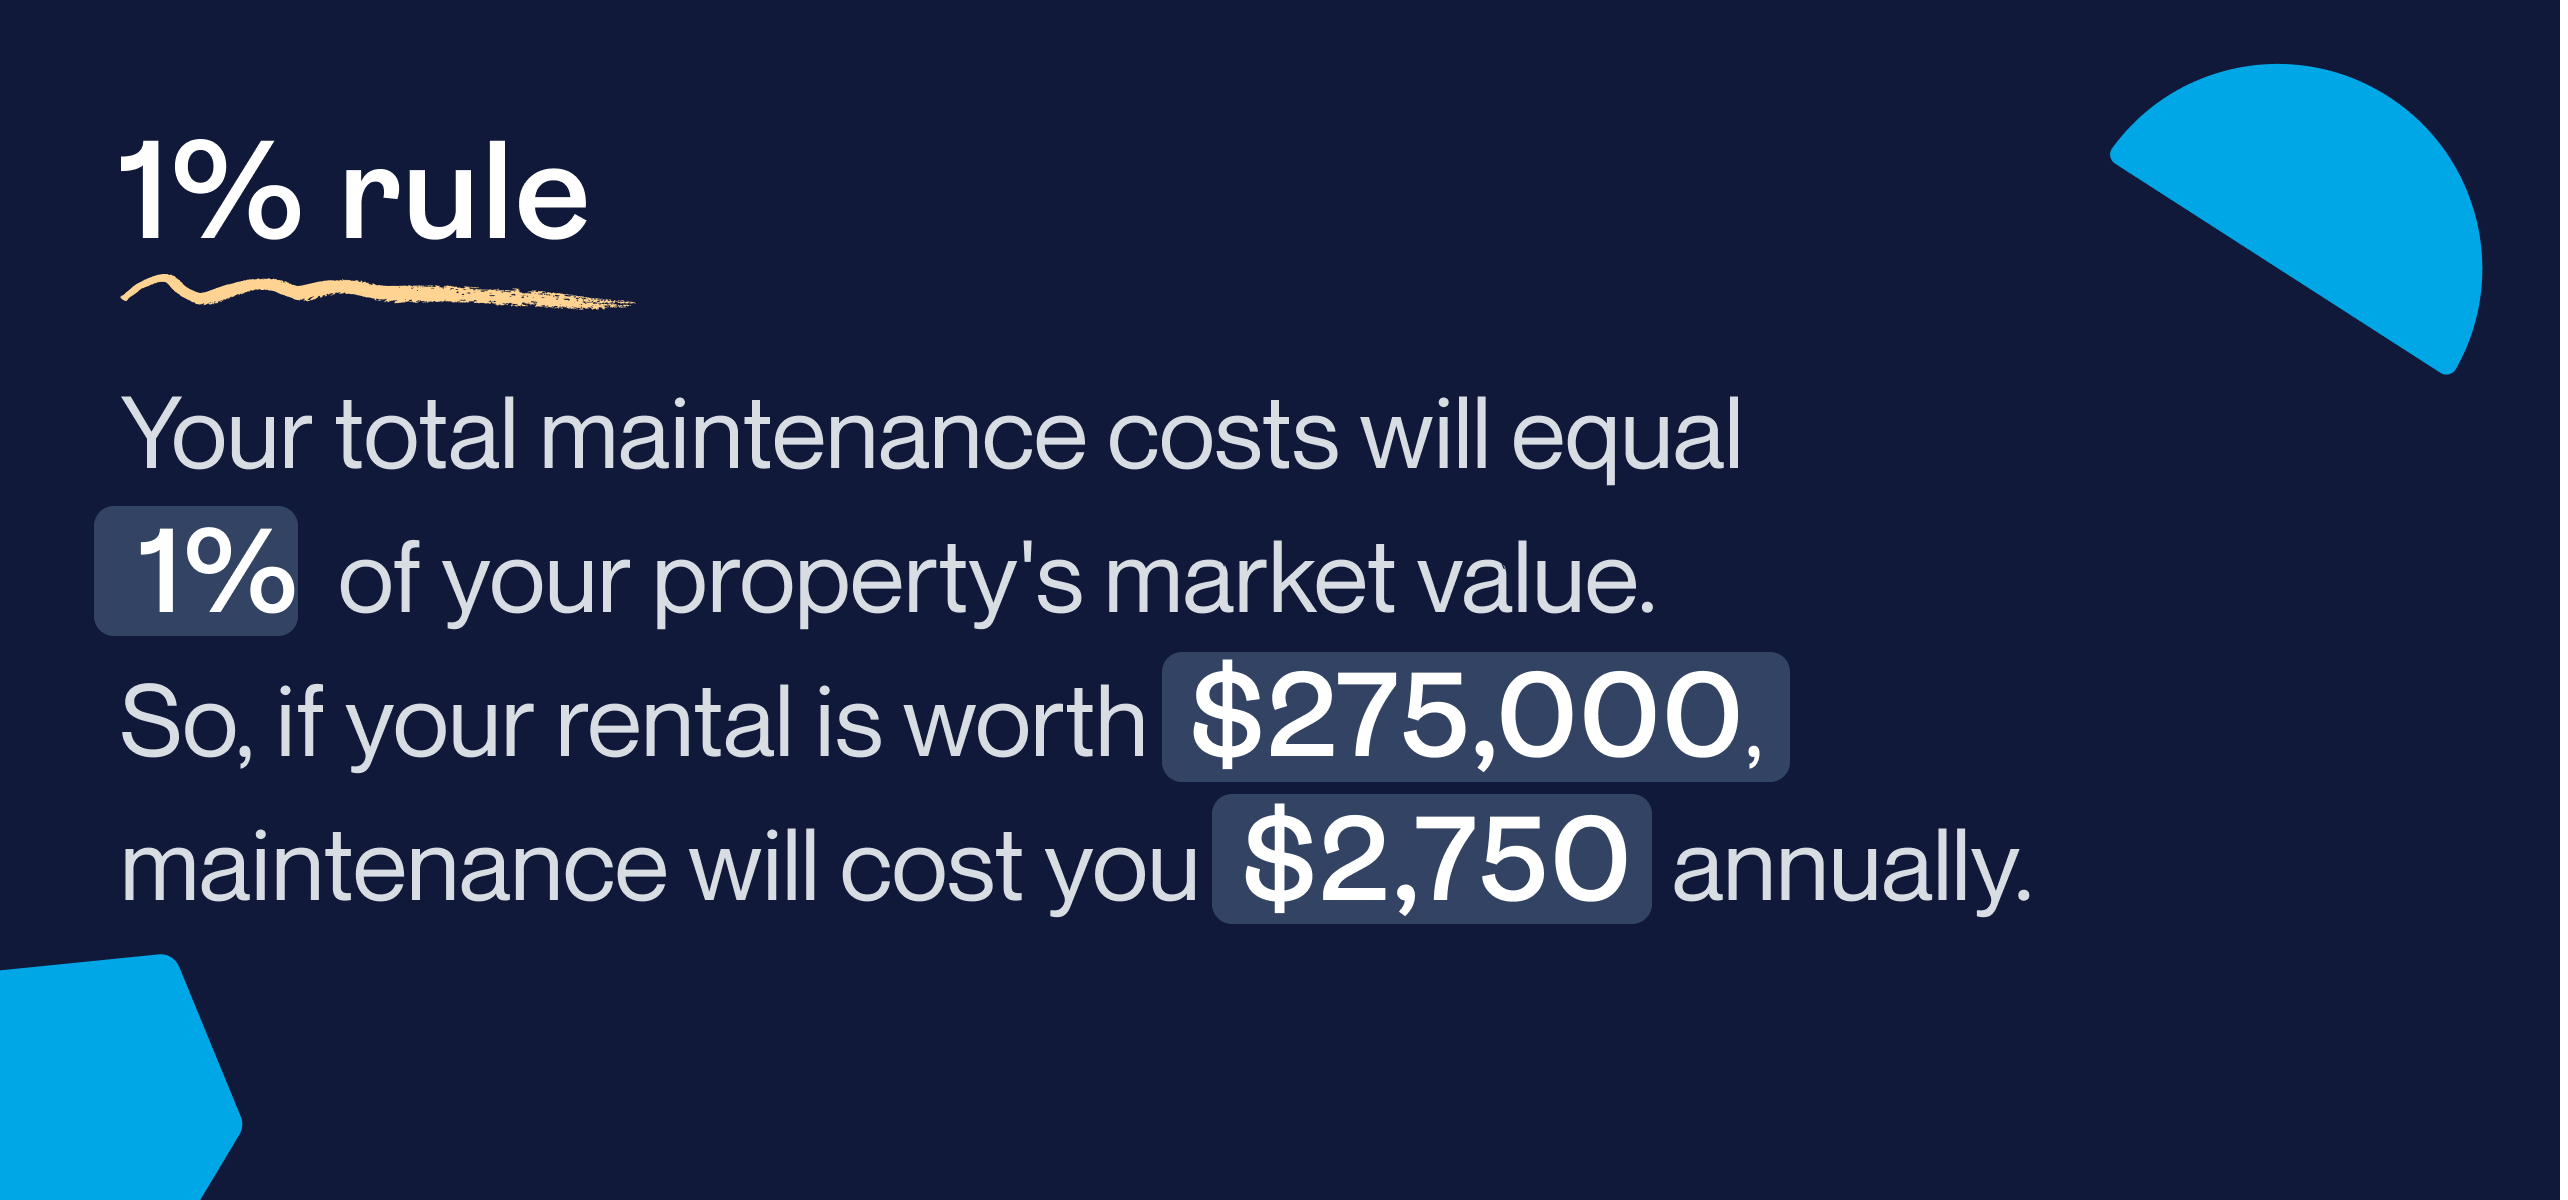 1% rule: Your total maintenance costs will equal 1% of your property's market value. So, if your rental is worth $275,000, maintenance will cost you $2,750 annually.